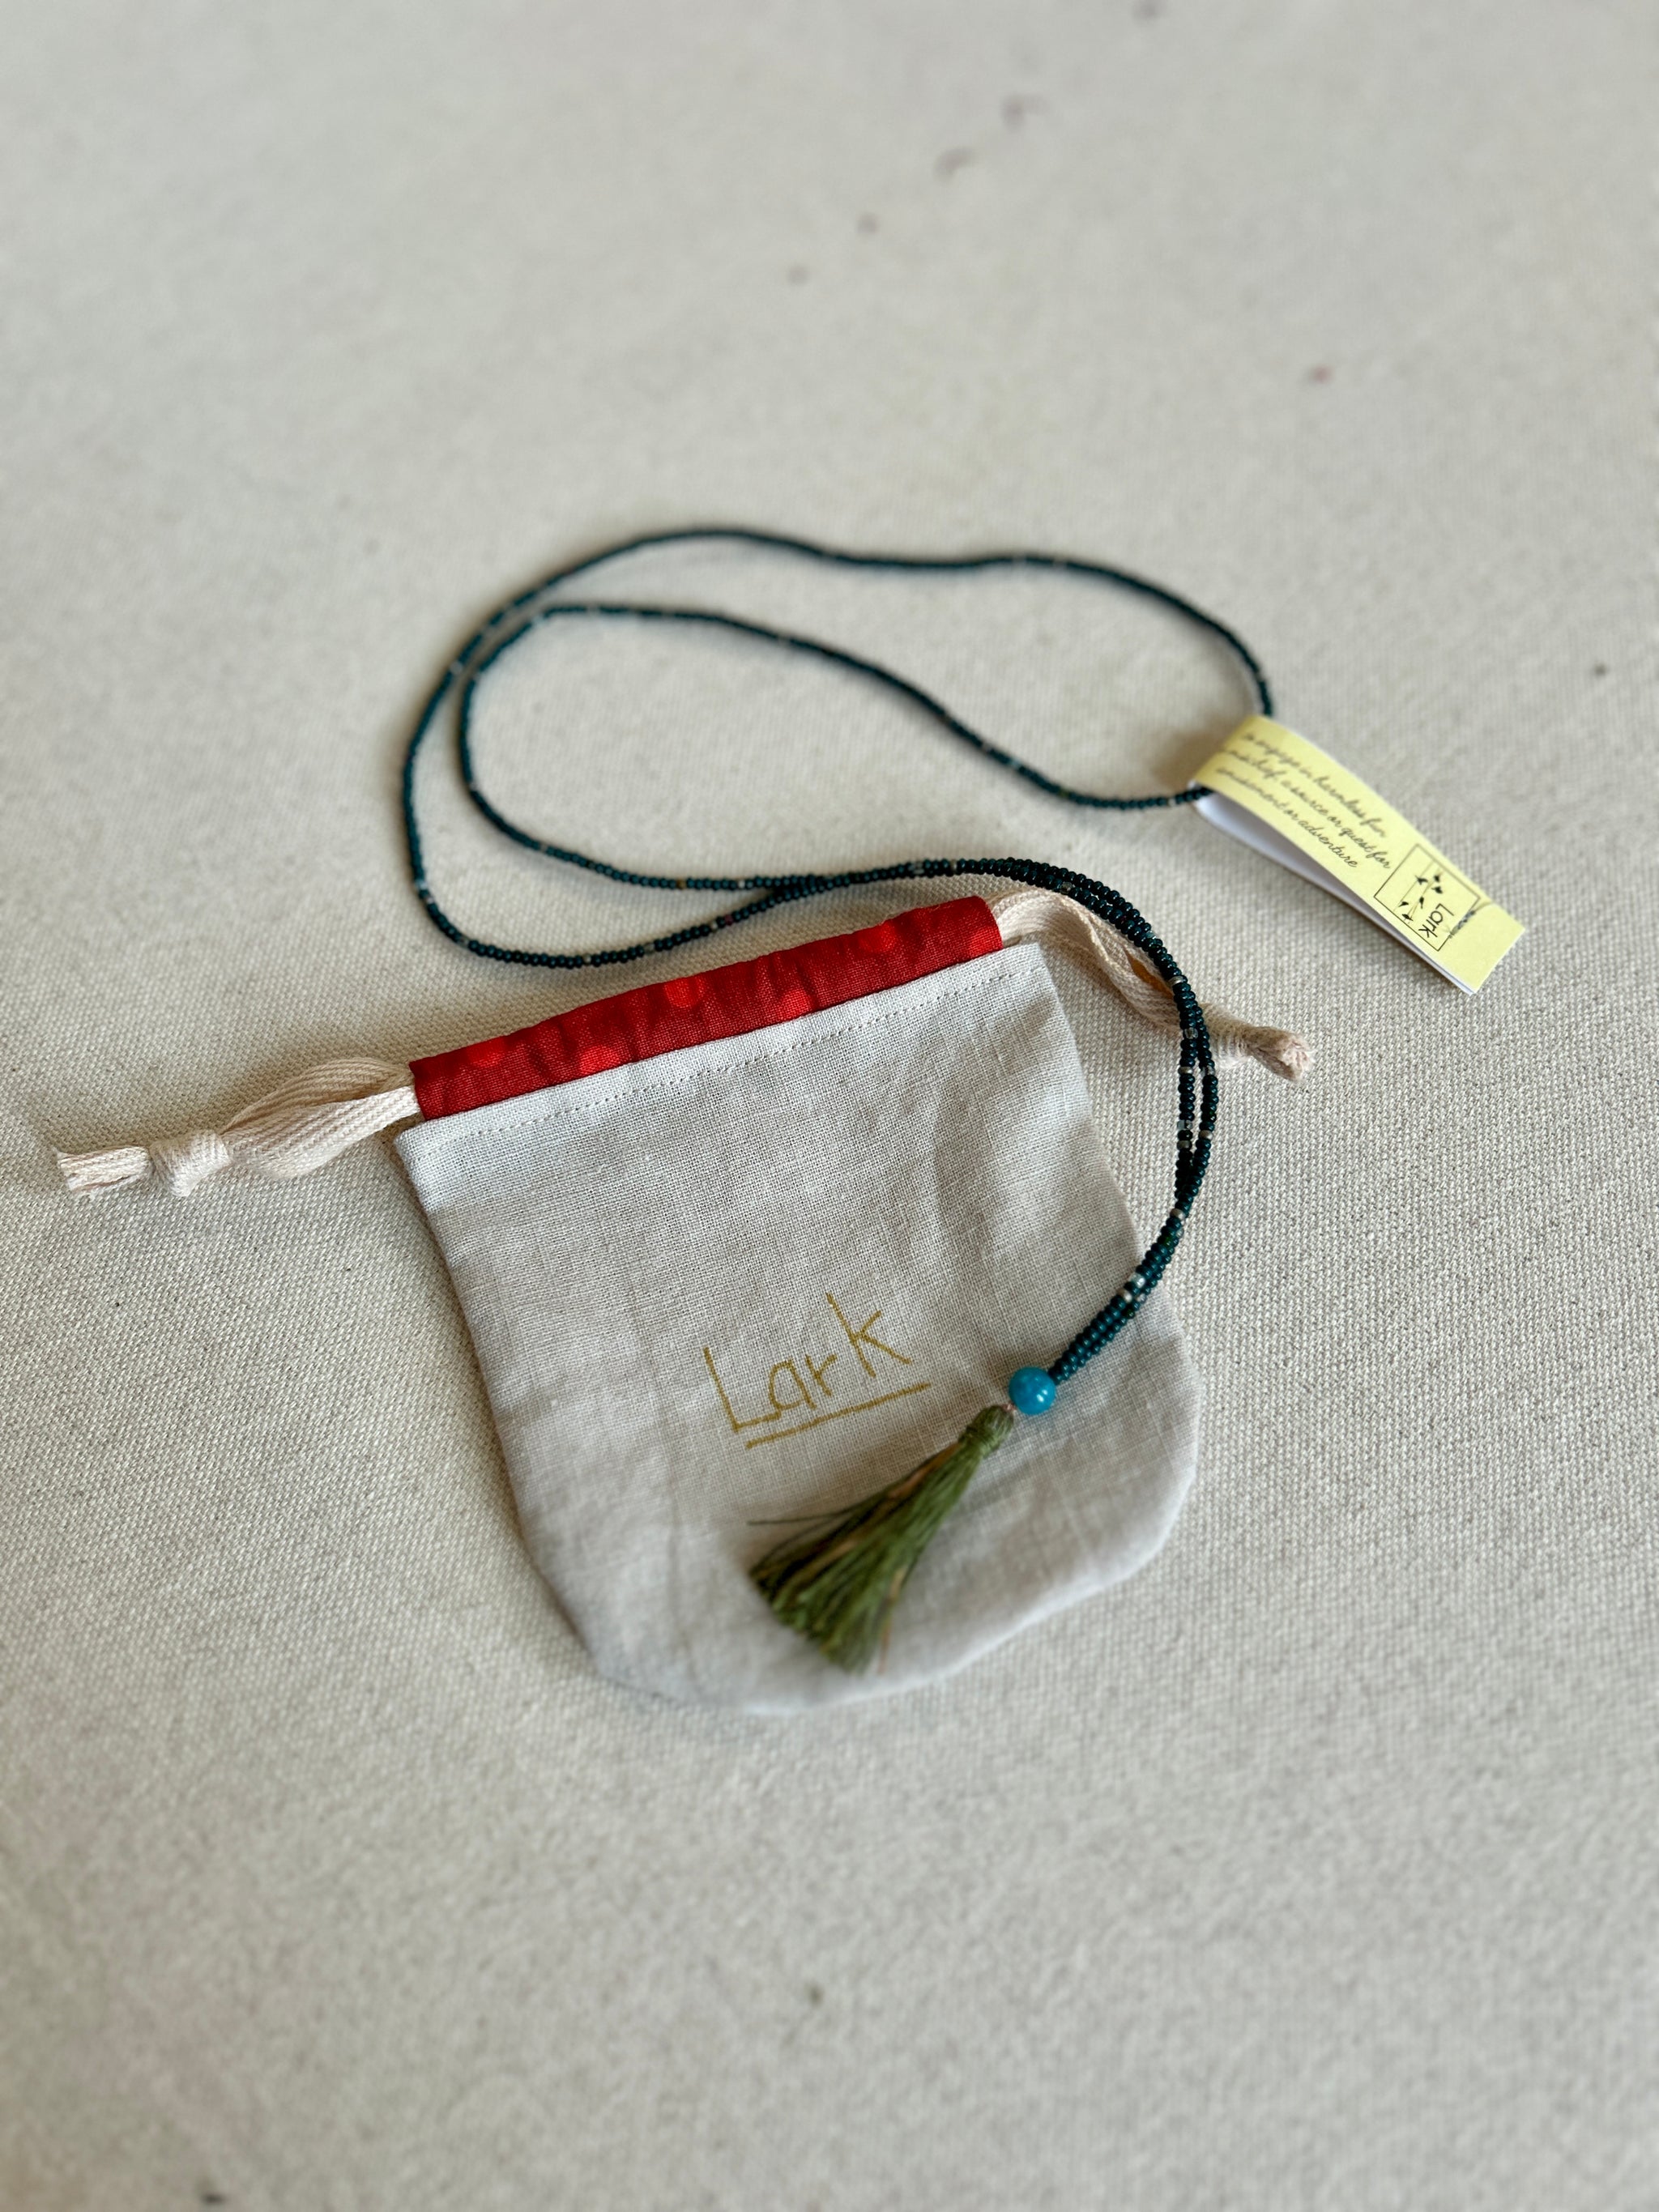 A beaded necklace with tassel lies coiled over a fabric bag with the word 'Lark' printed on it.